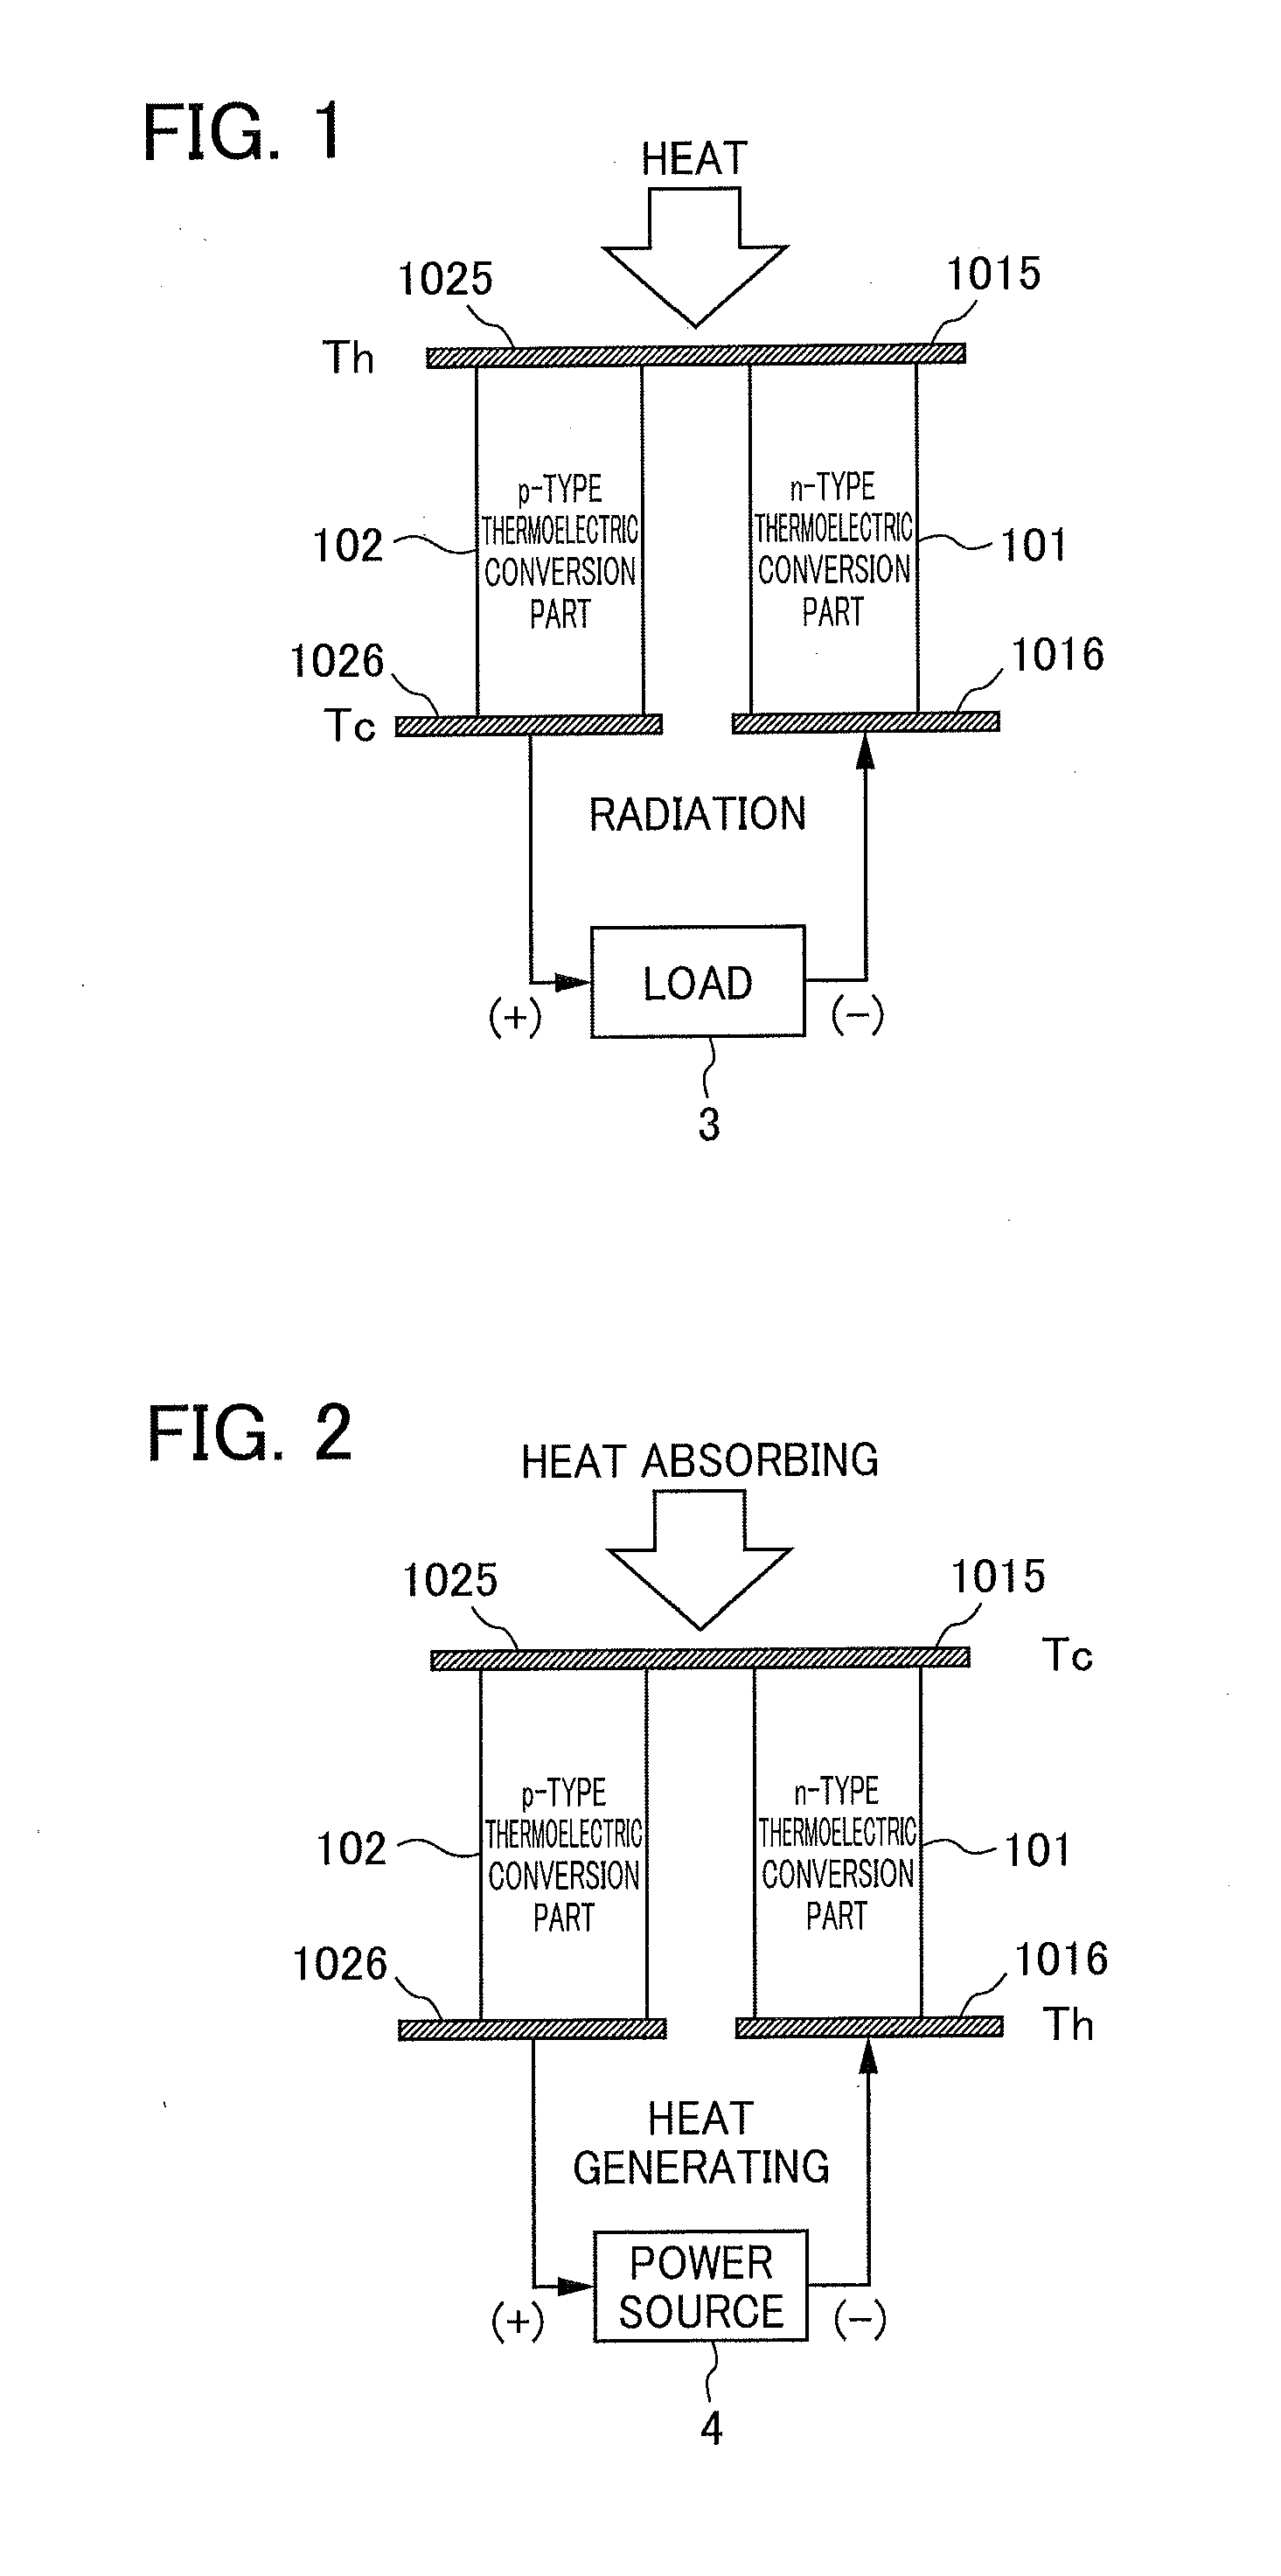 Magnesium-silicon composite material and process for producing same, and thermoelectric conversion material, thermoelectric conversion element, and thermoelectric conversion module each comprising or including the composite material